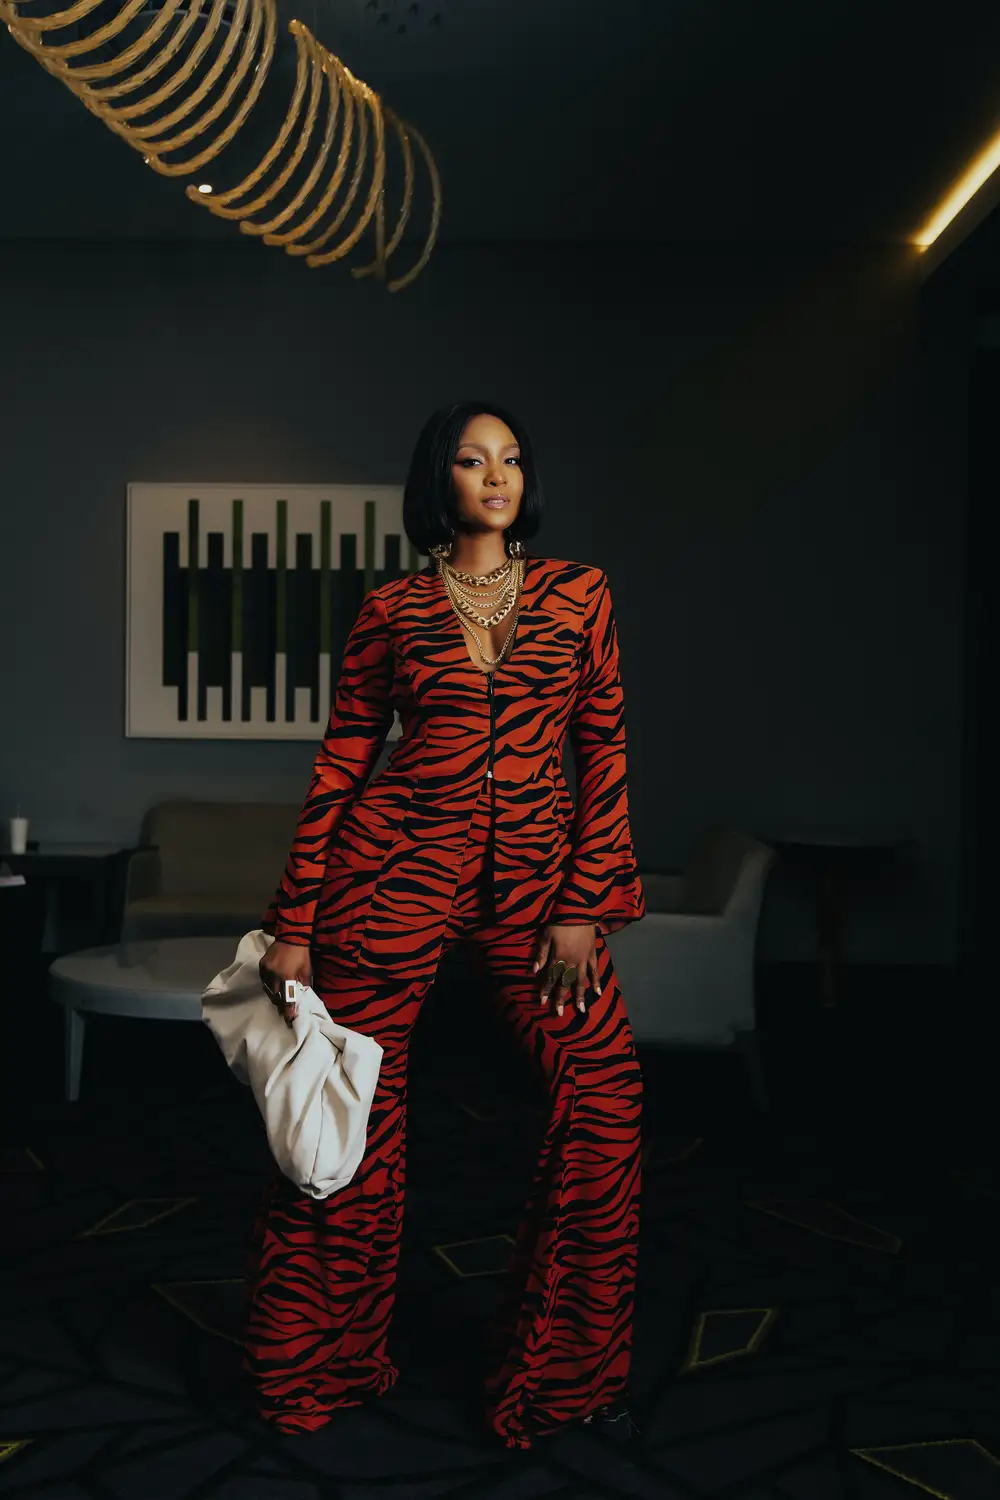 Woman Wearing a Zebra Print Black and Red Suit